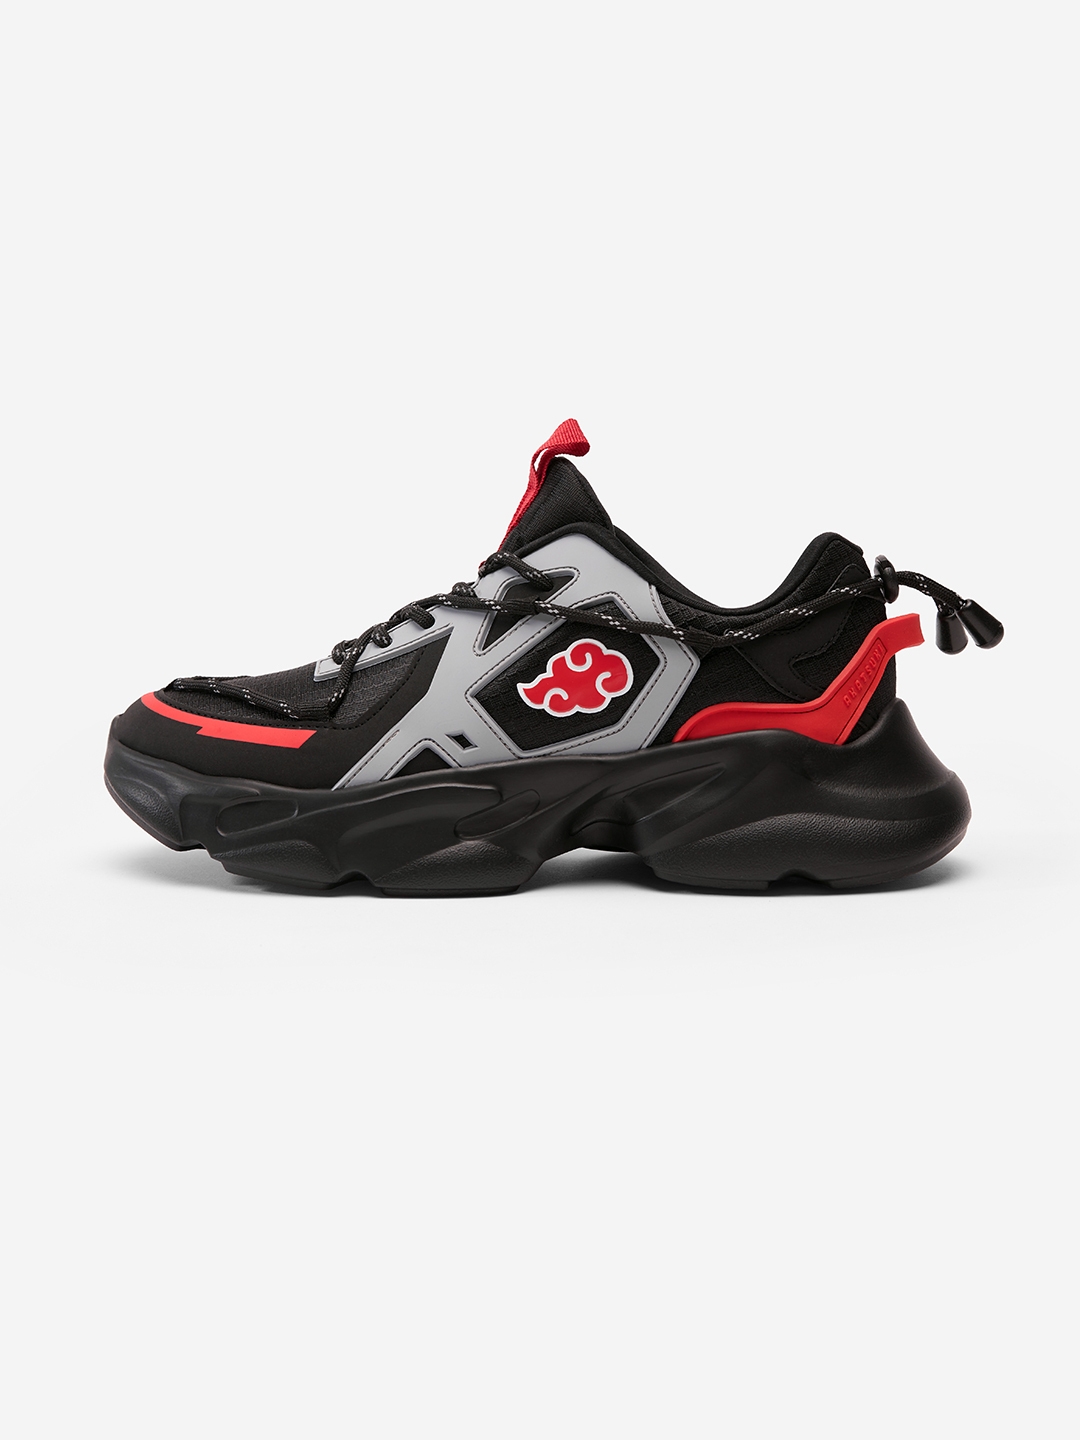 The Soulted Store Official Naruto: Akatsuki Men Low Top Sneakers